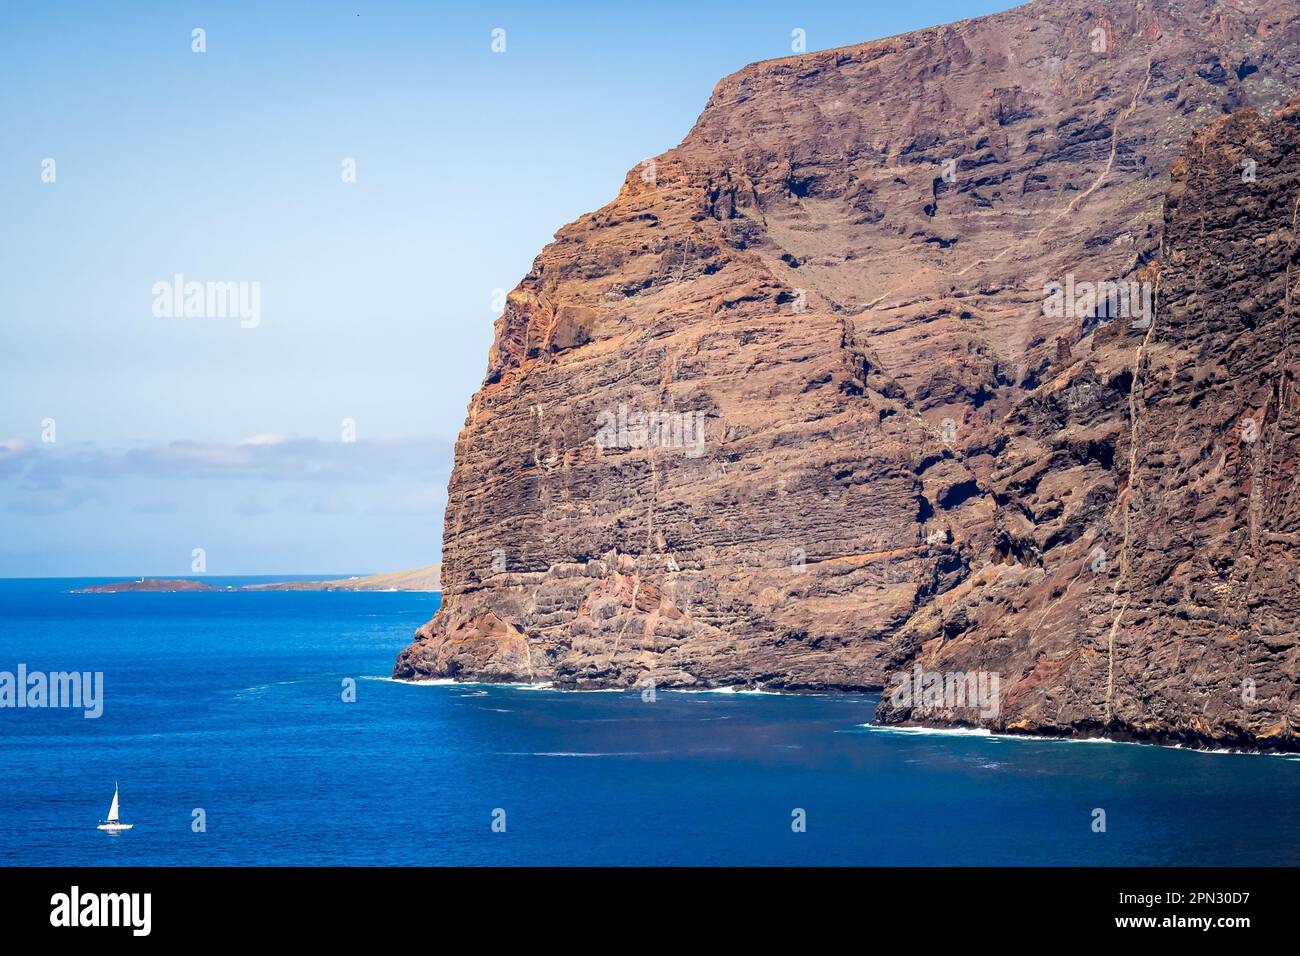 Majestic Acantilados de Los Gigantes cliffs standing tall, while a small sailing boat sails by, with Punta de Teno headland and Teno lighthouse. Stock Photo